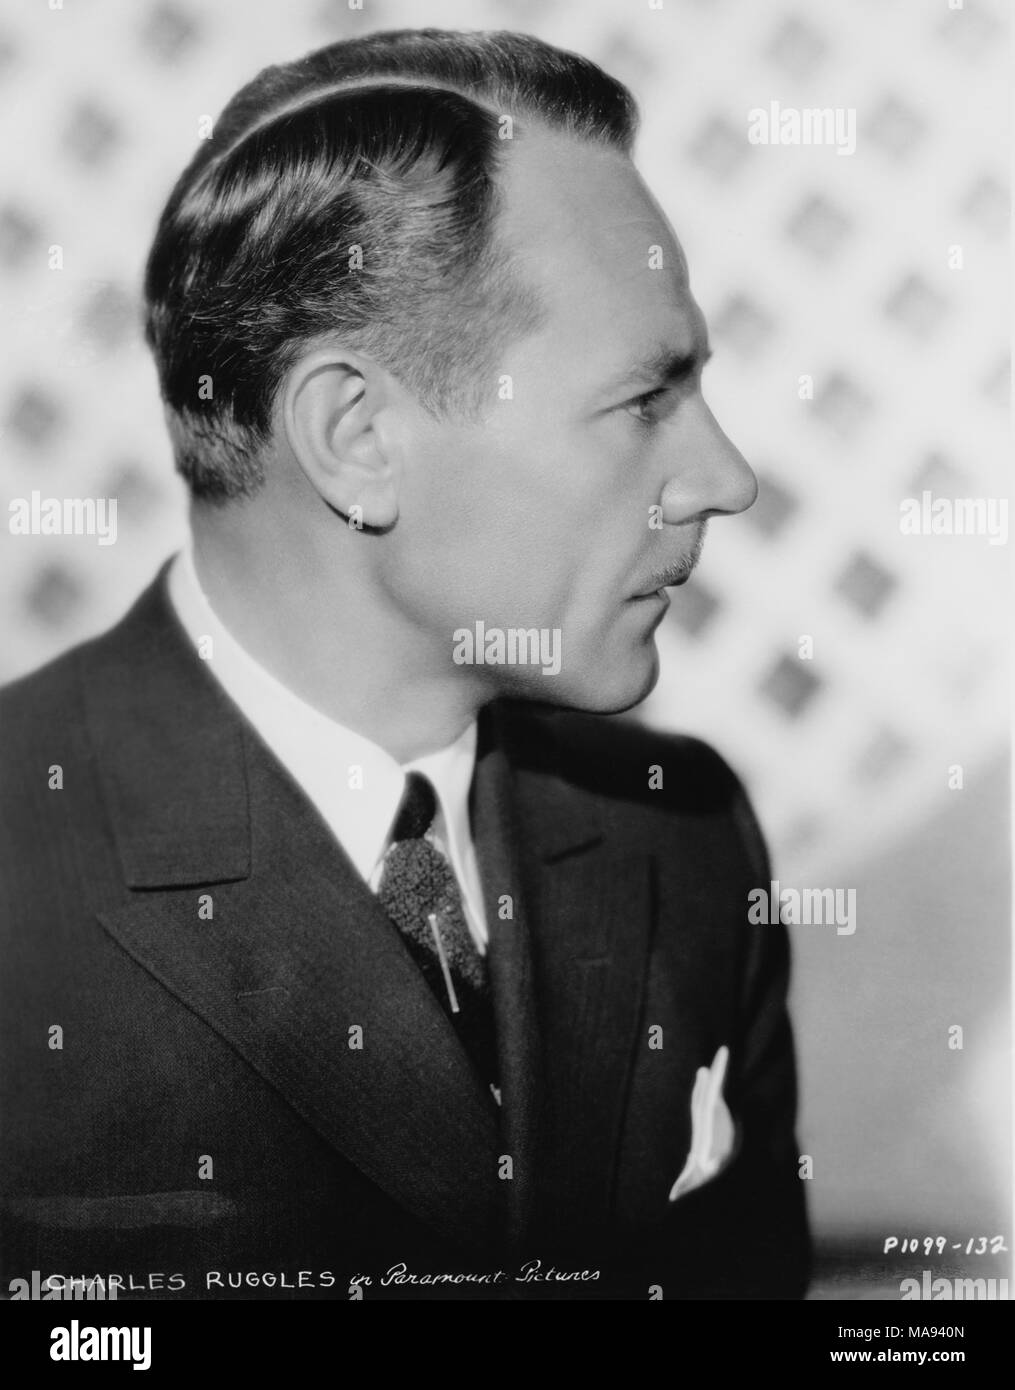 Charles Ruggles, Publicity Portrait, Head and Shoulders Profile, Paramount Pictures, 1934 Stock Photo